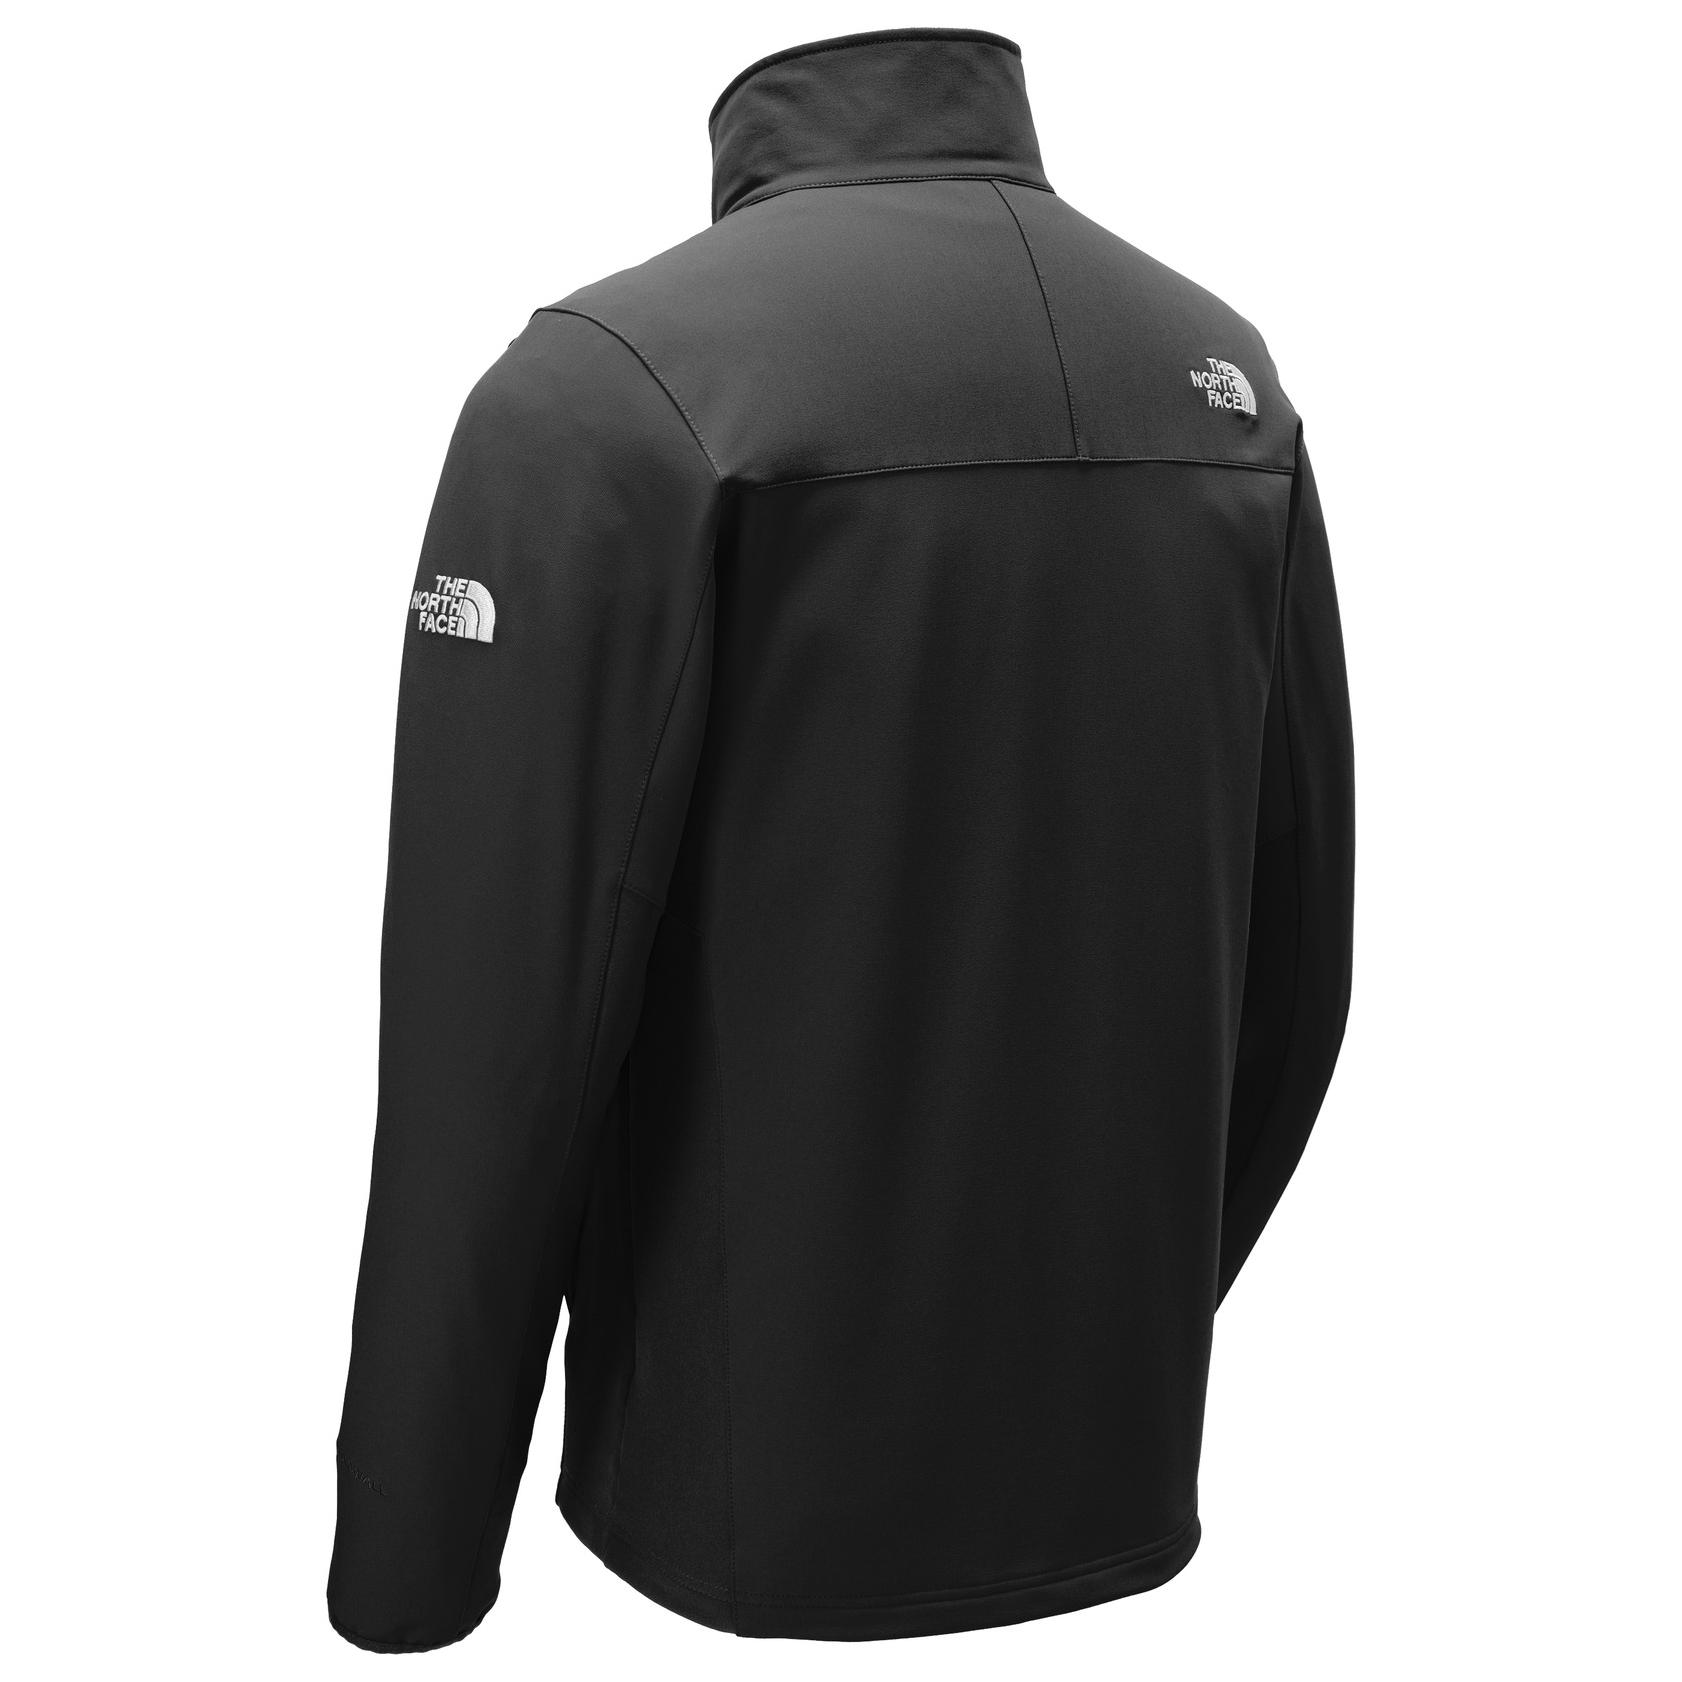 Gouverneur abstract Martin Luther King Junior The North Face NF0A3LGV Tech Stretch Soft Shell Jacket - Black |  FullSource.com